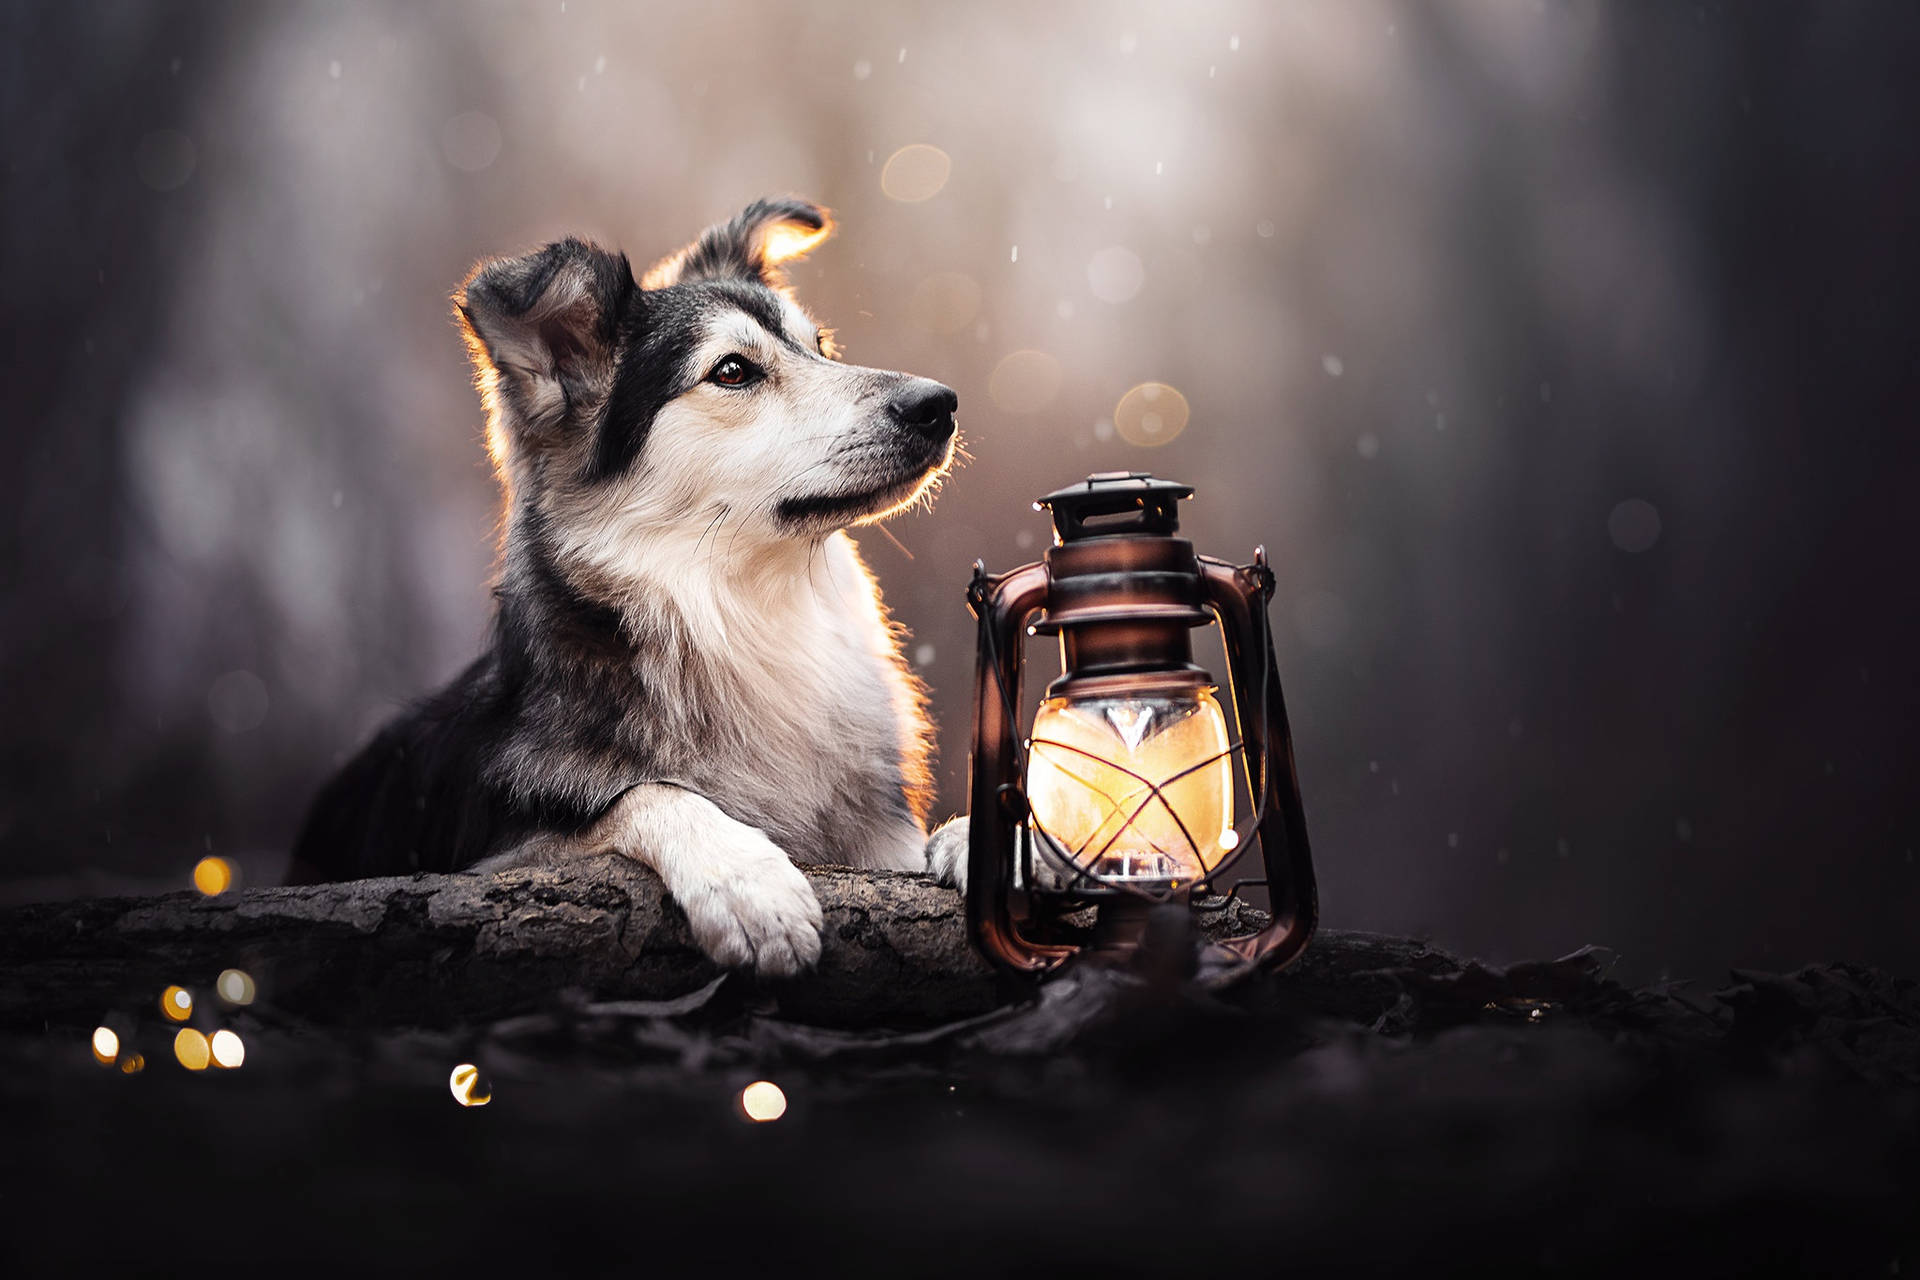 Cute Puppy With Lantern Wallpaper